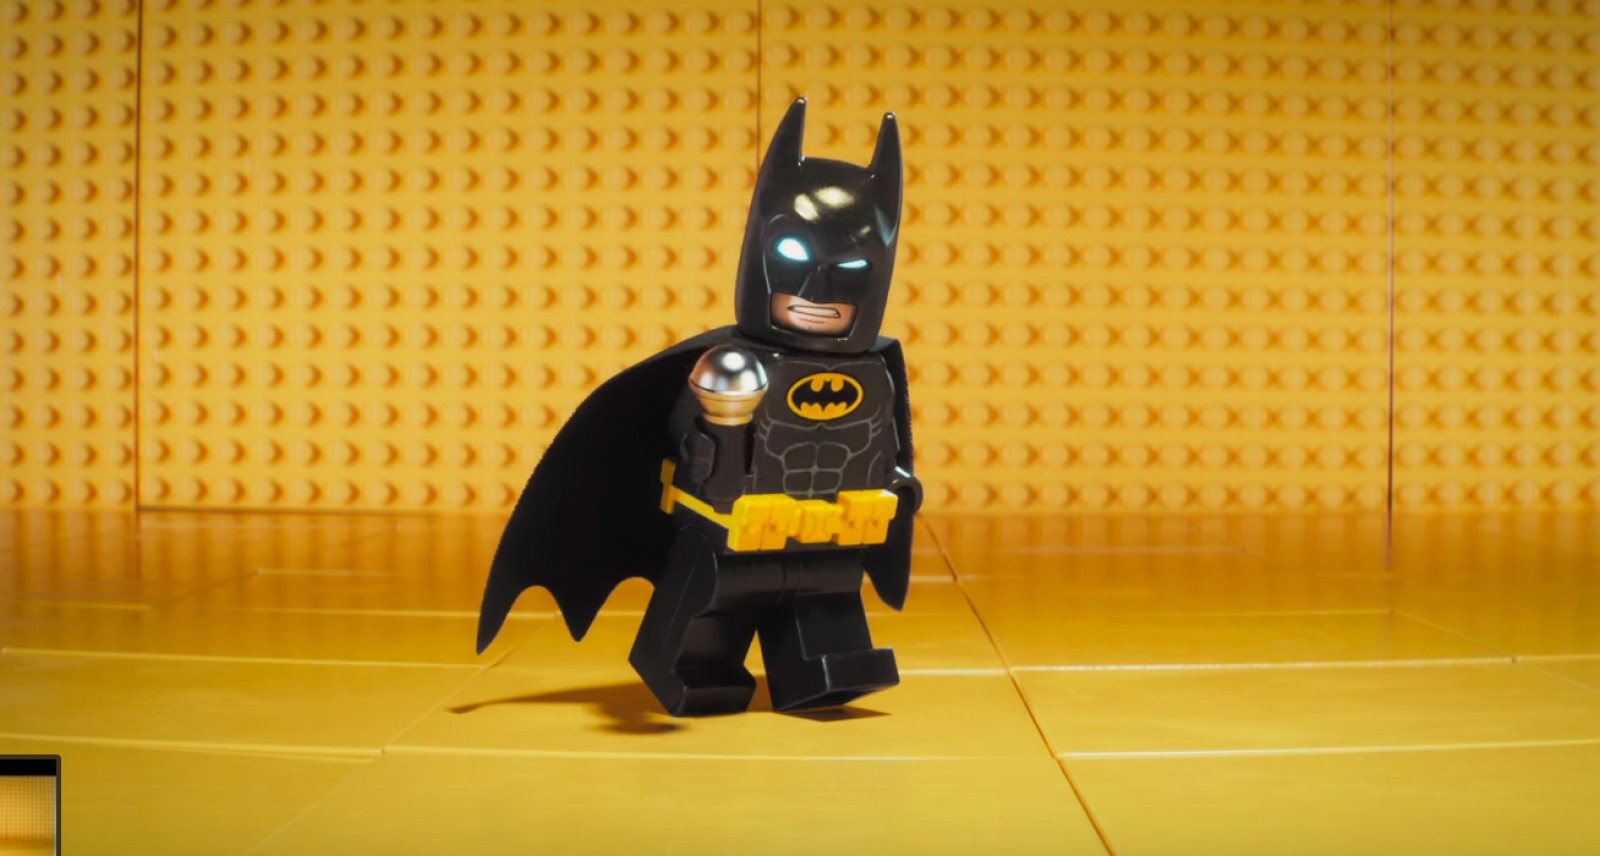 Everything About This Trailer for 'The Lego Batman Movie 